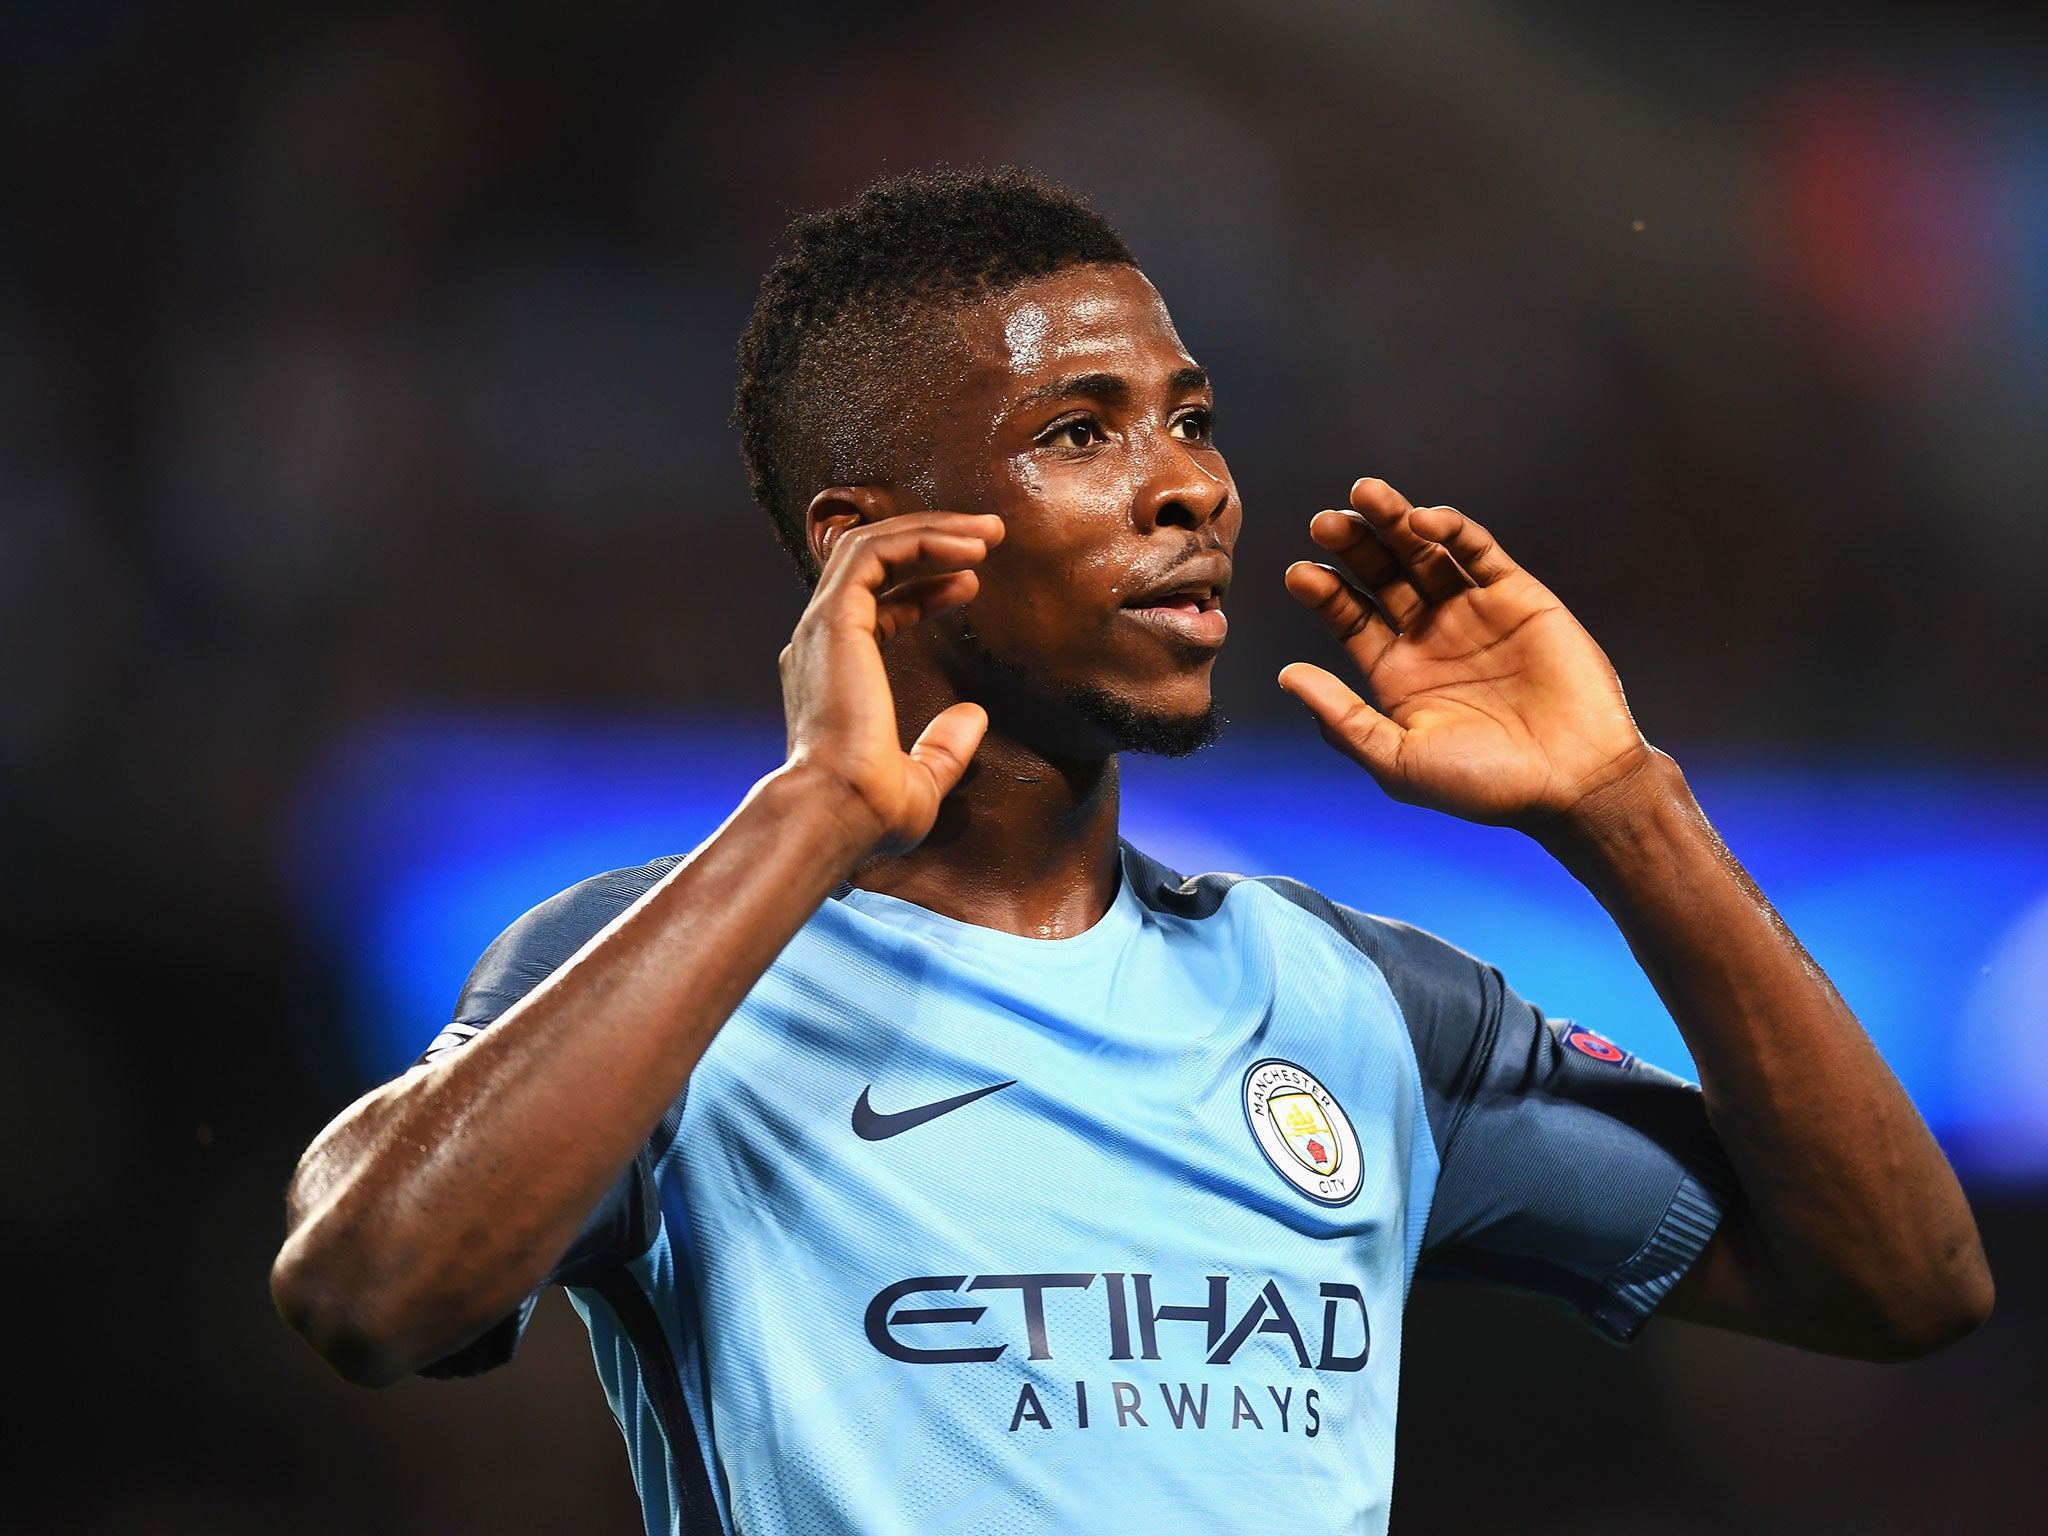 Kelechi Iheanacho joins from Manchester City